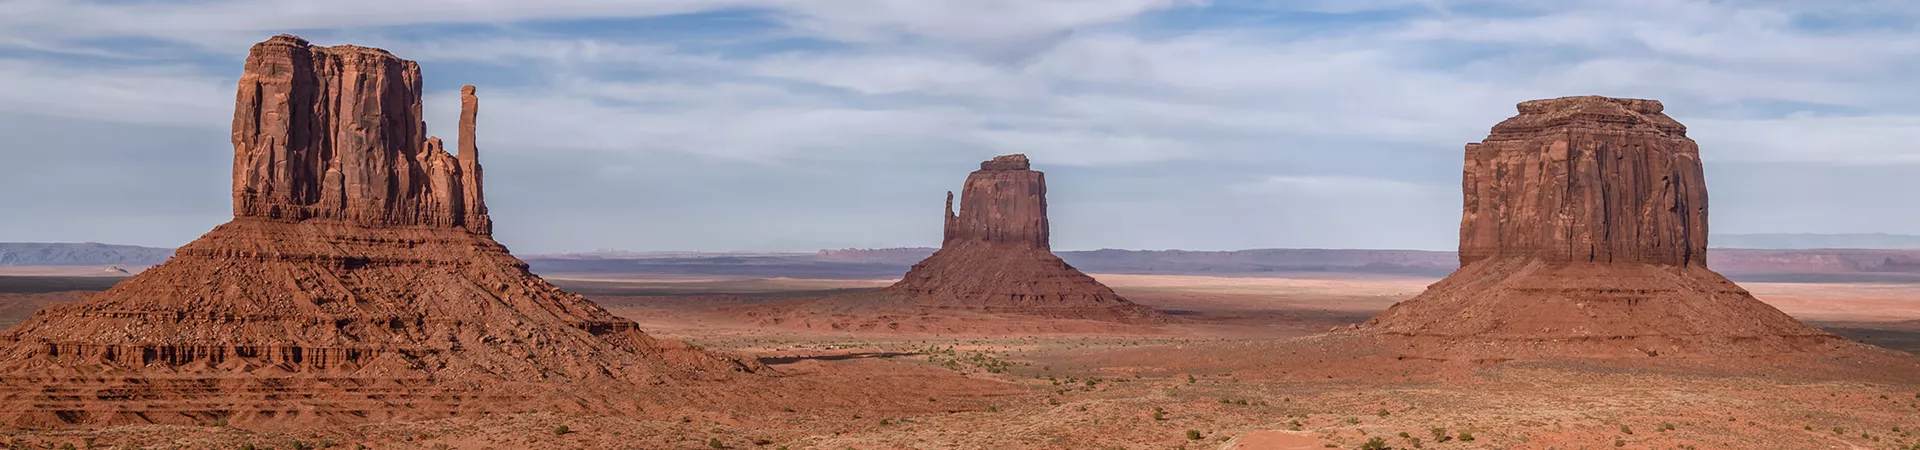 Monument Valley by day